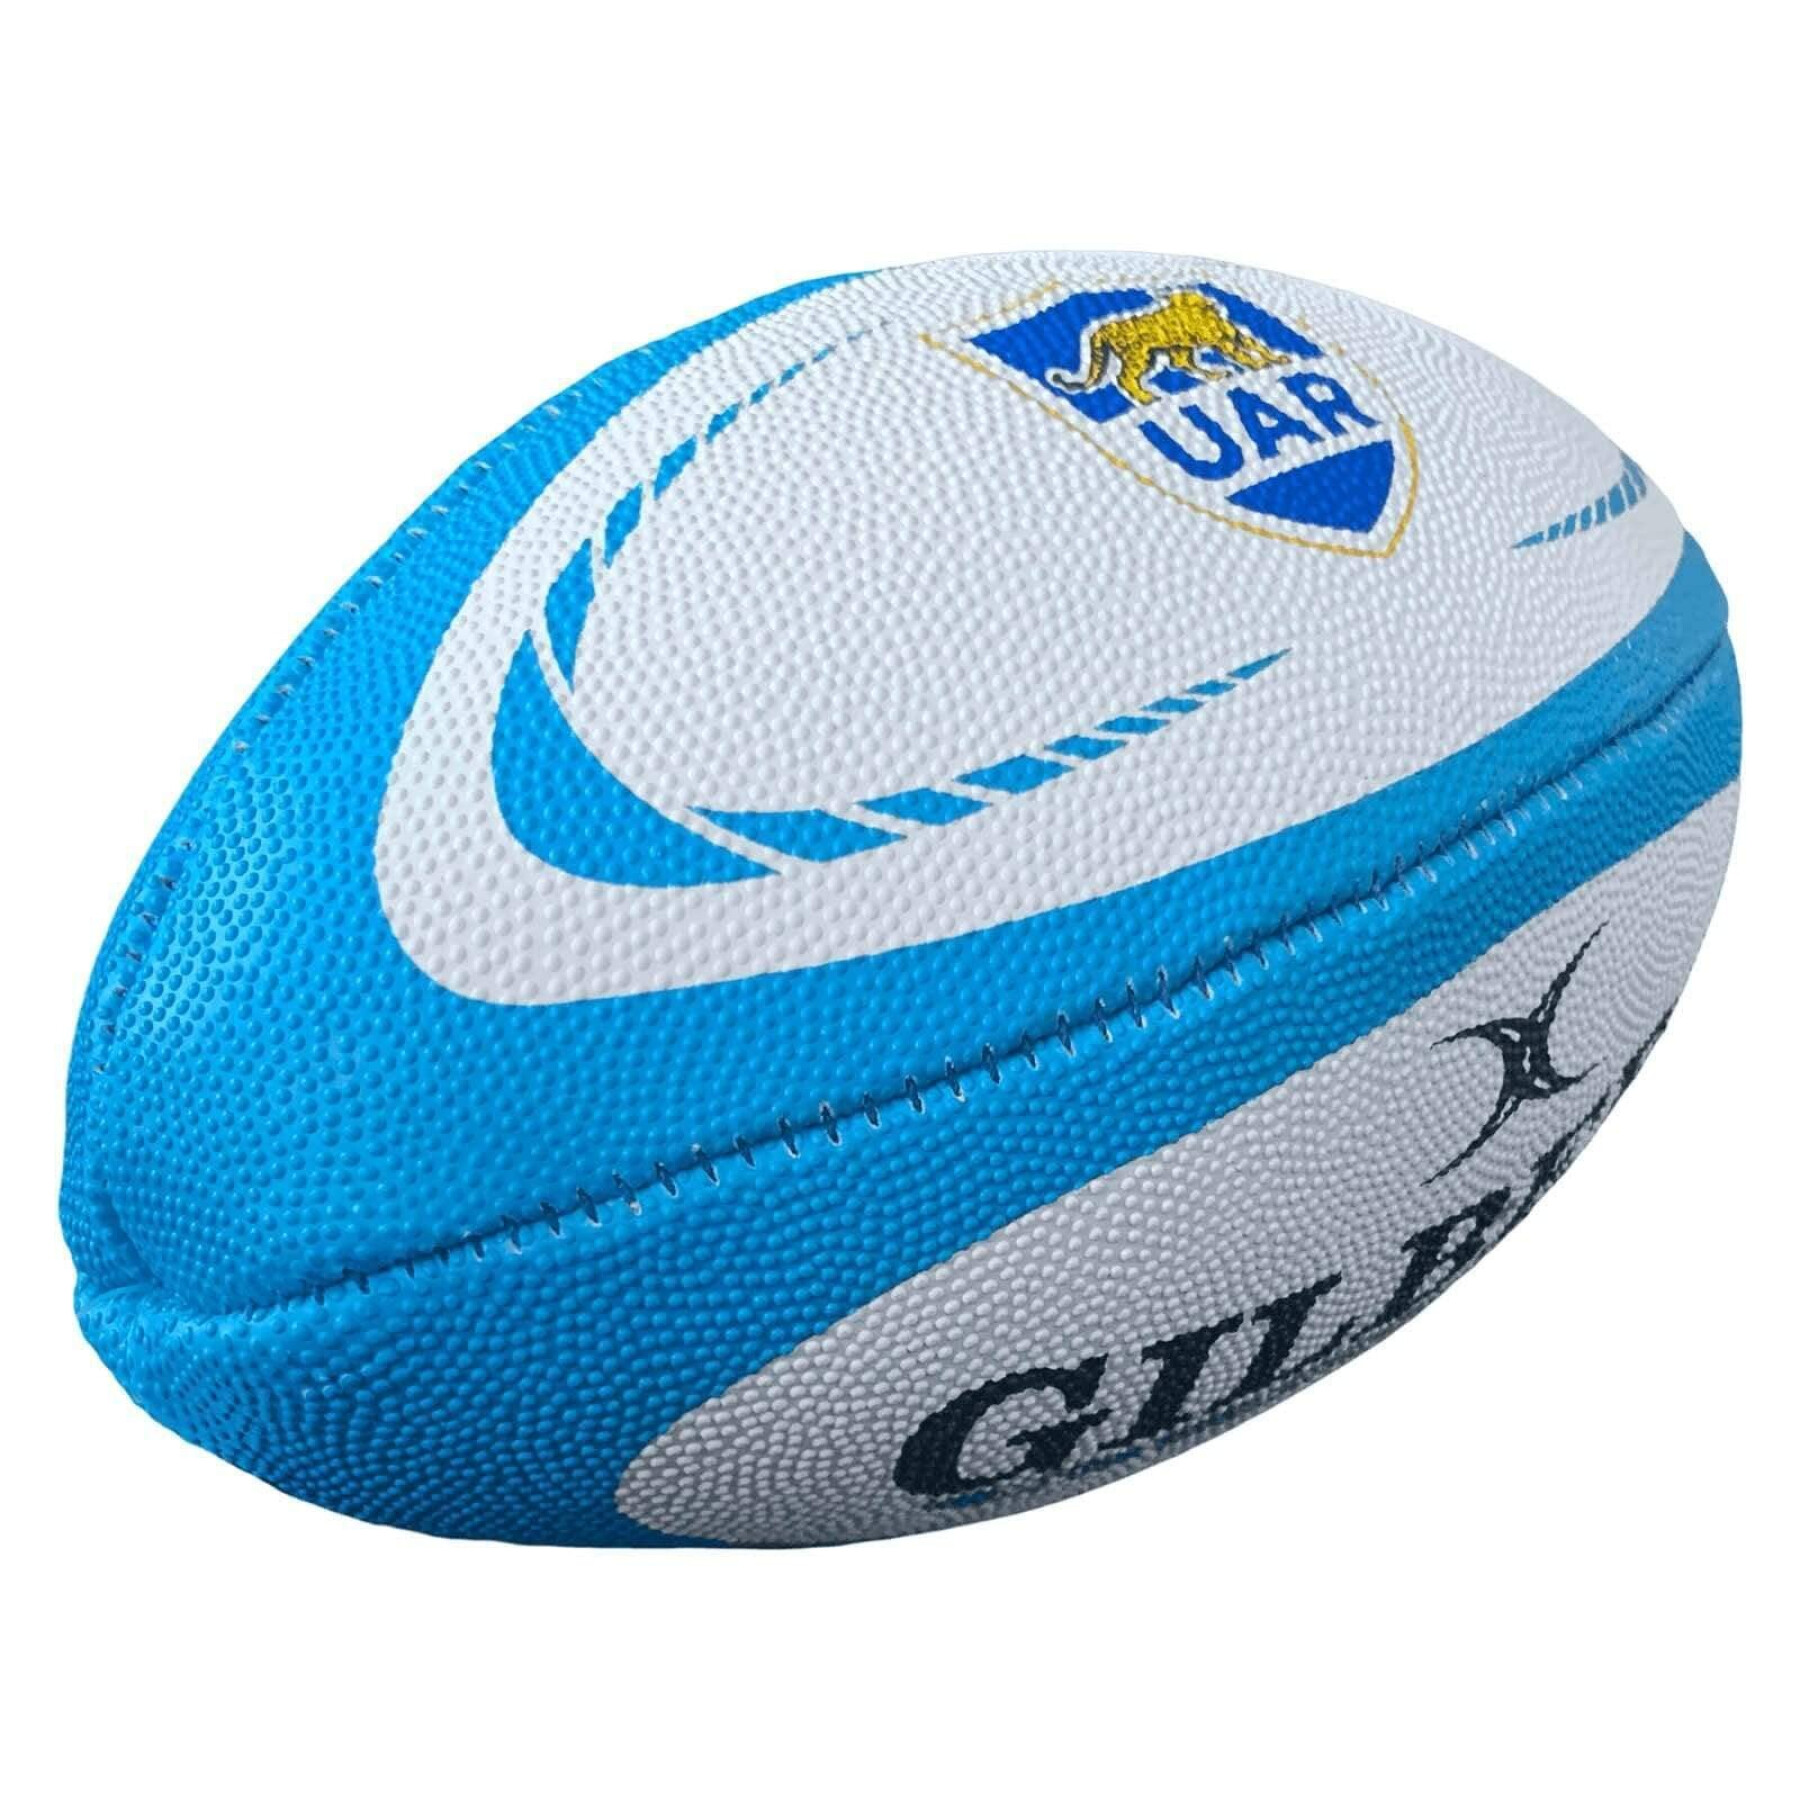 Rugbyball Mini-Replik Gilbert Argentine (taille 1)